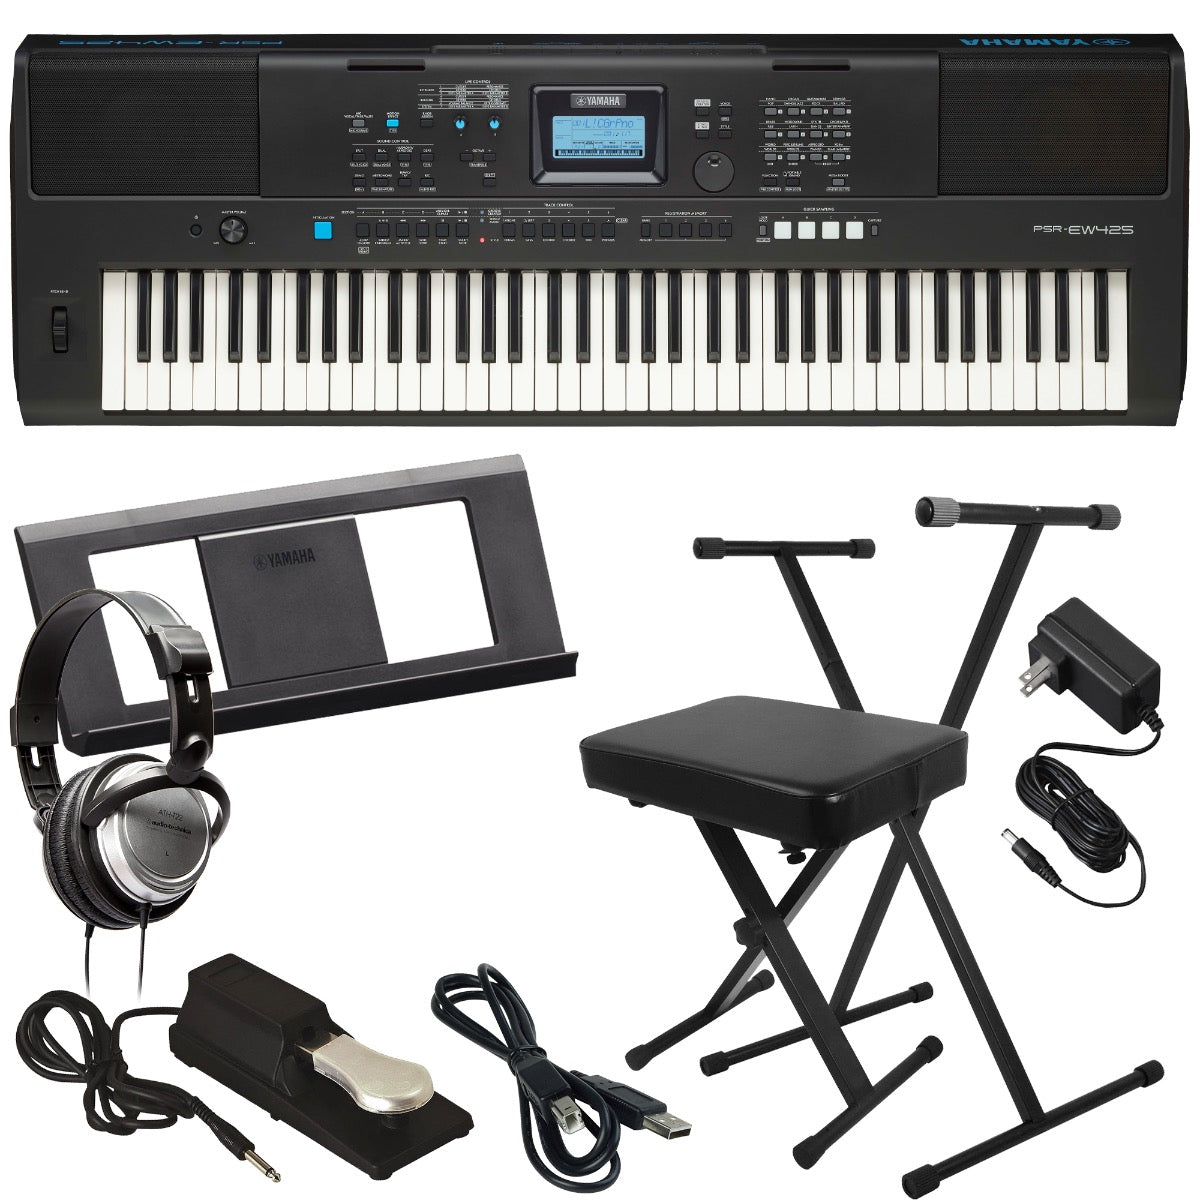 Collage of the Yamaha PSR-EW425 76-Note Portable Keyboard KEY ESSENTIALS BUNDLE showing the included components